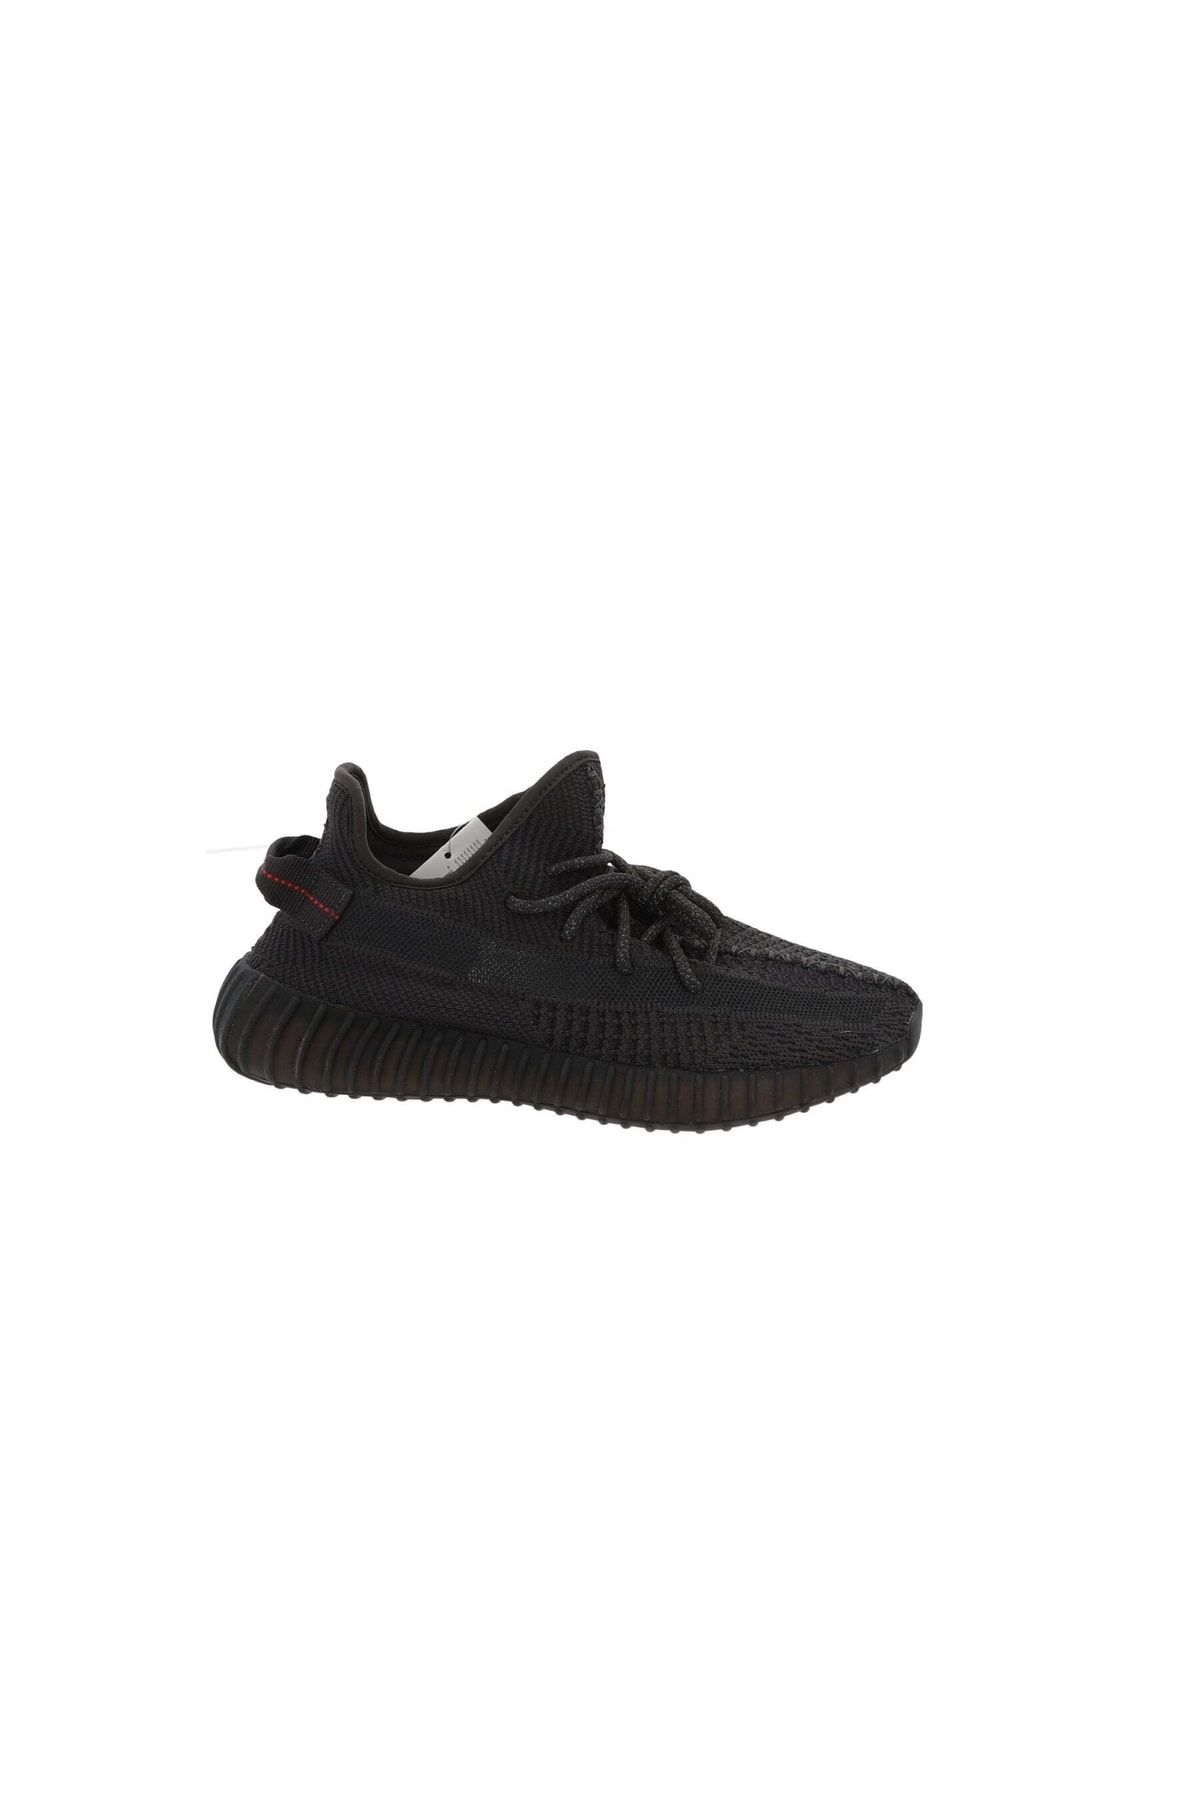 Foot Locker Australia The Adidas YEEZY BOOST 350 V2 BRED Drops Online TOMORROW 05/12 At 12:01AM Please Note: This Product Is A High Heat Release Where Large Of | botacademy.com